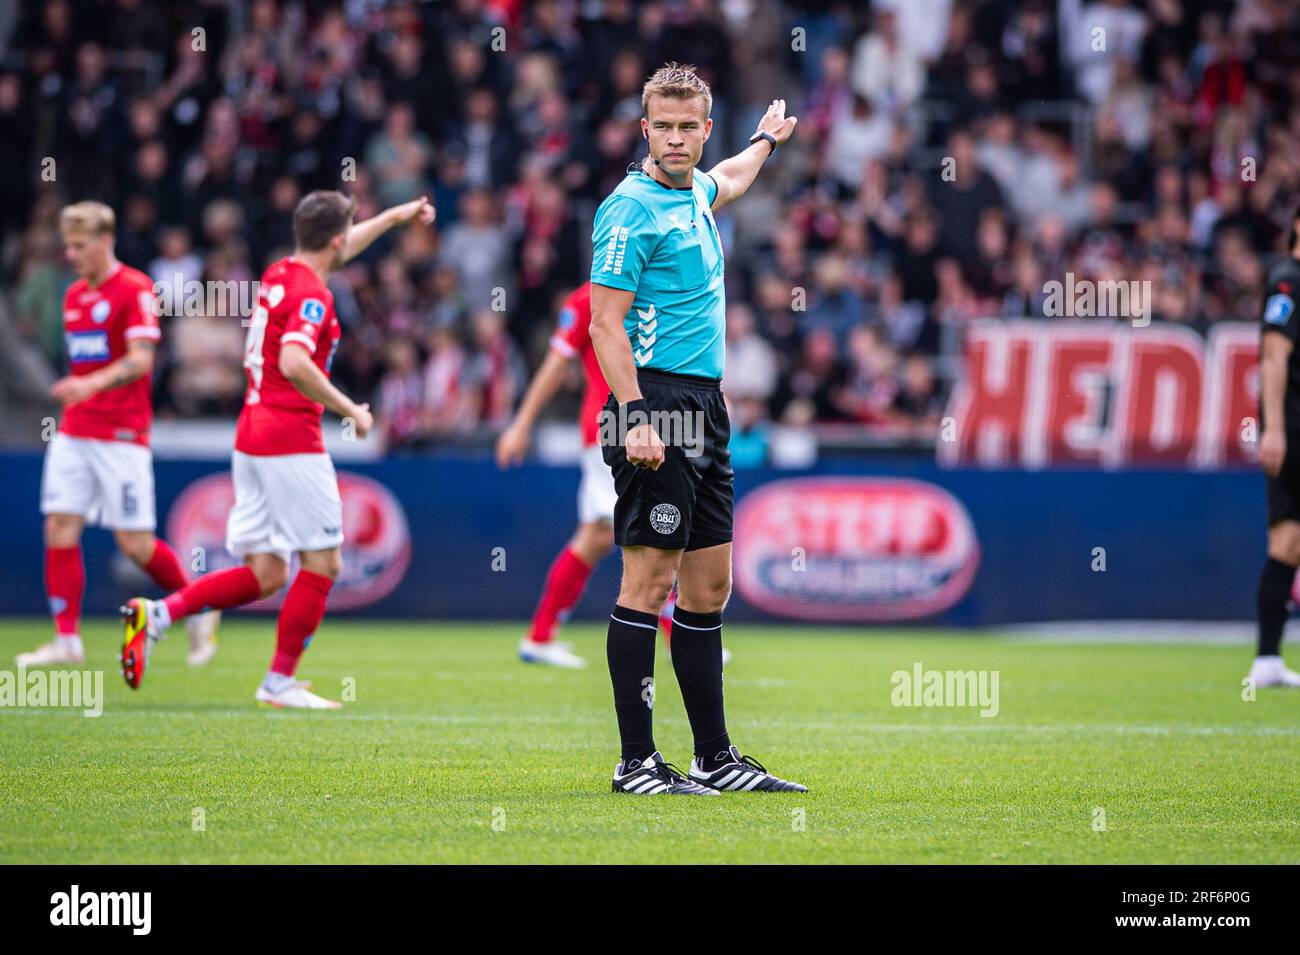 Herning, Denmark. 30th, July 2023. Referee Jacob Karlsen seen during the 3F Superliga match between FC Midtjylland and Silkeborg IF at MCH Arena in Herning. (Photo credit: Gonzales Photo - Morten Kjaer). Stock Photo